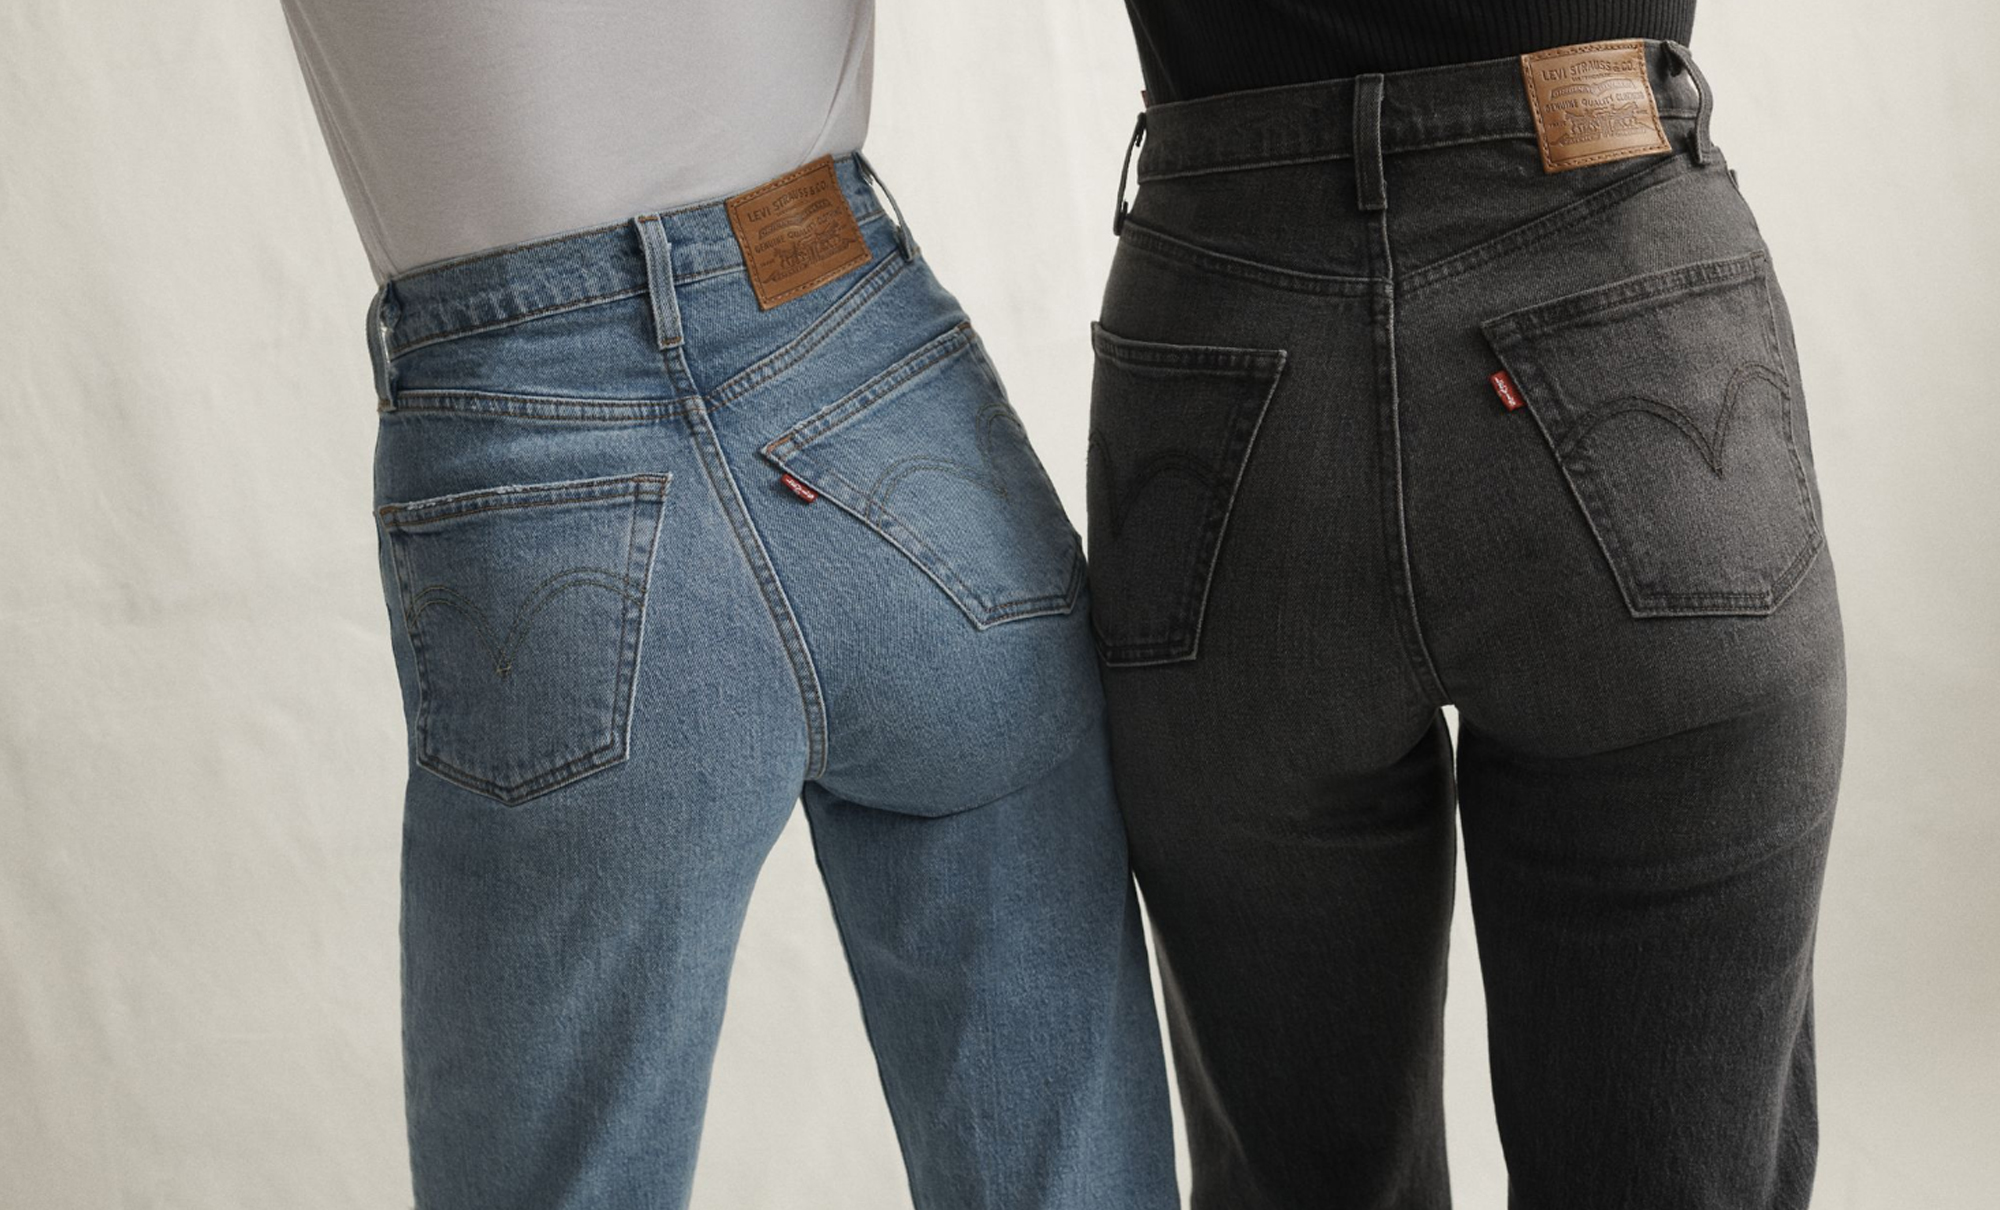 kollision meteor øre Nothing but Love for the 'Mom Jean' - Levi Strauss & Co : Levi Strauss & Co